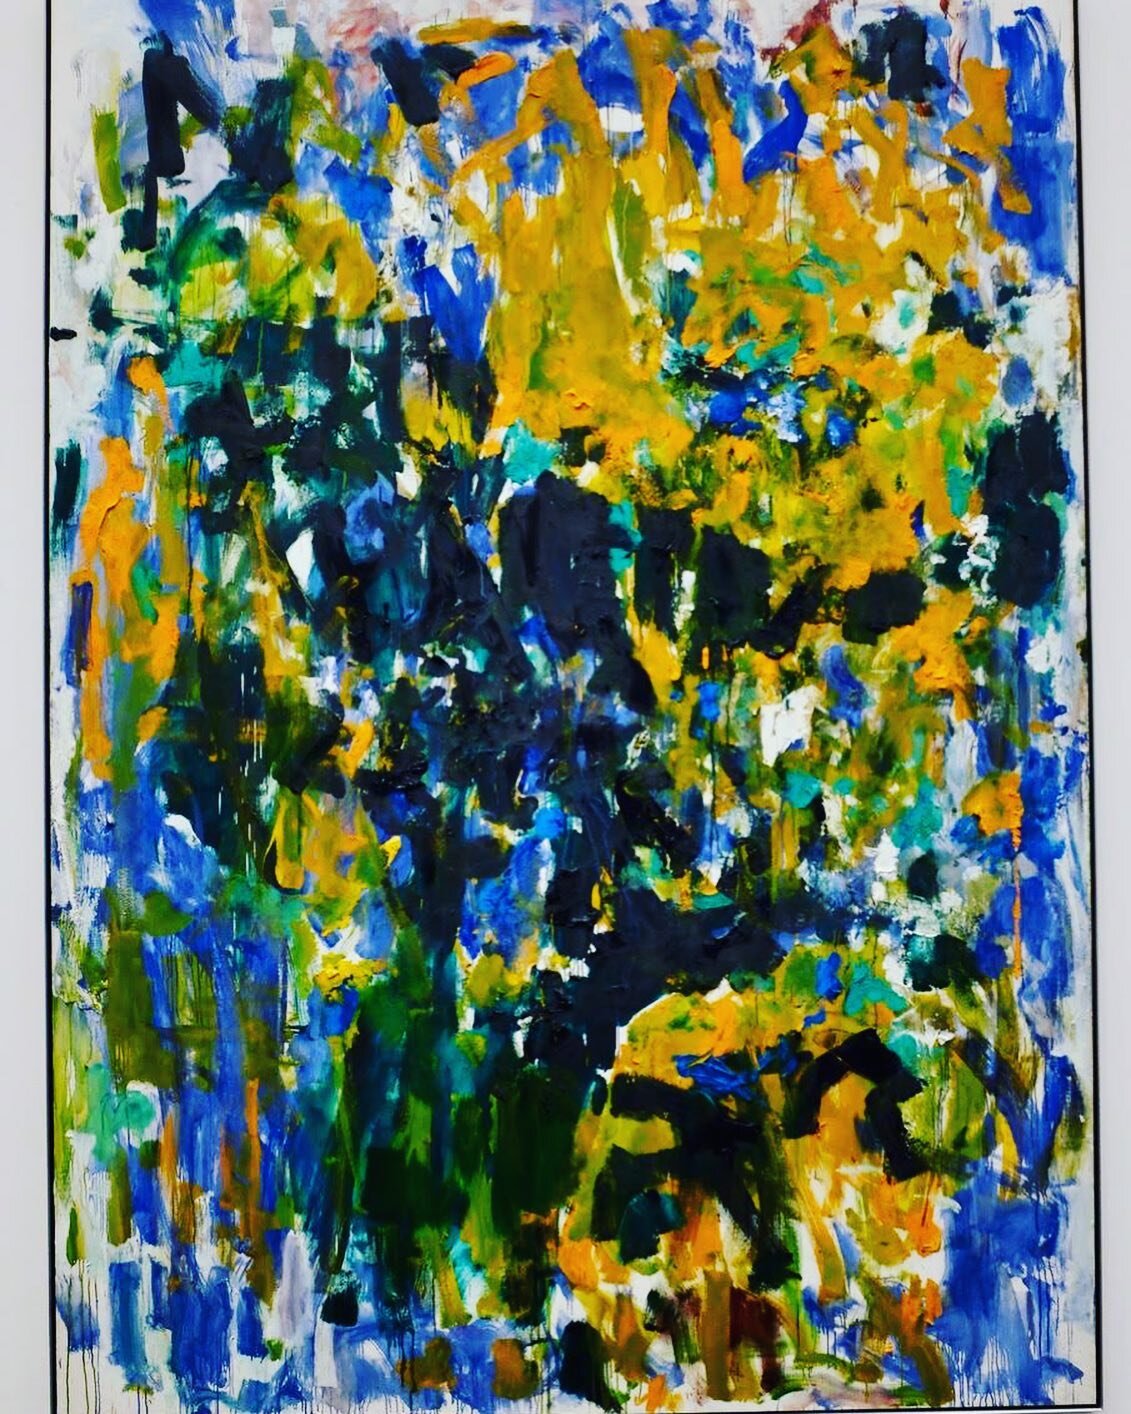 Joan Mitchel painting at Houston Museum of Fine Art new contemporary wing @charleslovellart #joanmitchell #joanmitchellfoundation #joanmitchellpainting #joanmitchellcenter #houston #houstonmuseumdistrict #houstonmuseumoffinearts #contemporaryart